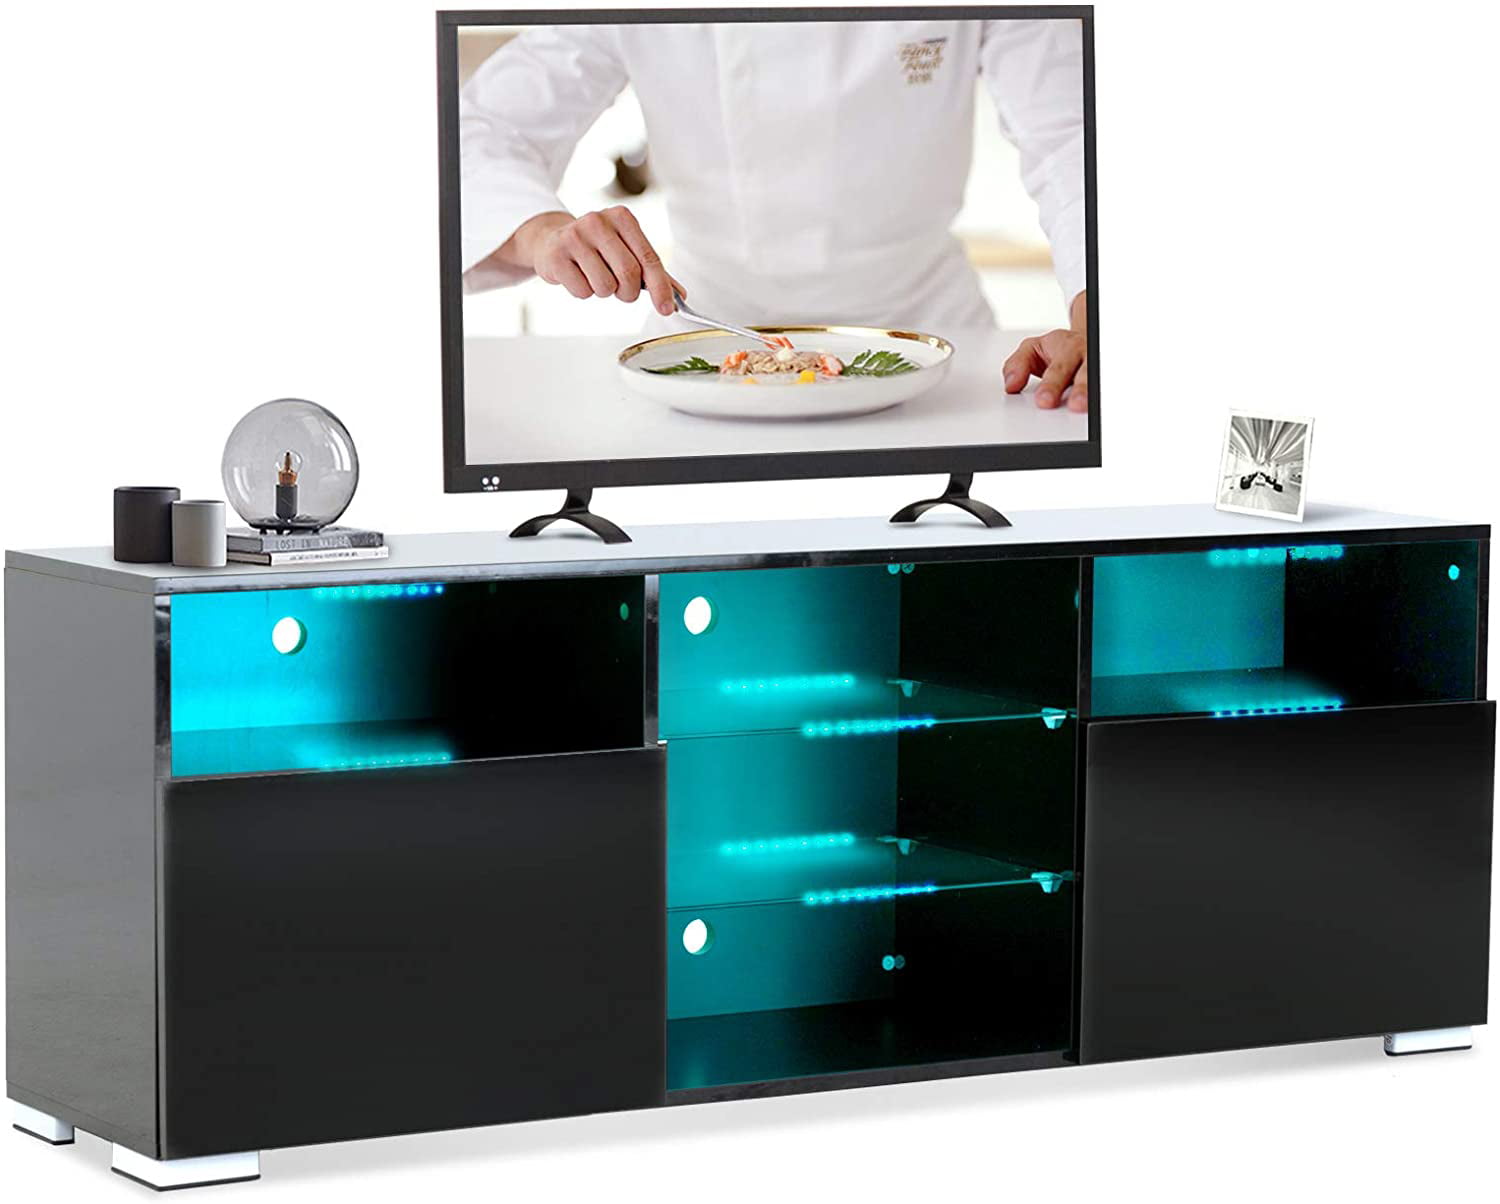 Buy Black Tv Stand Wlights Modern Led Tv Stand Wremote Control High